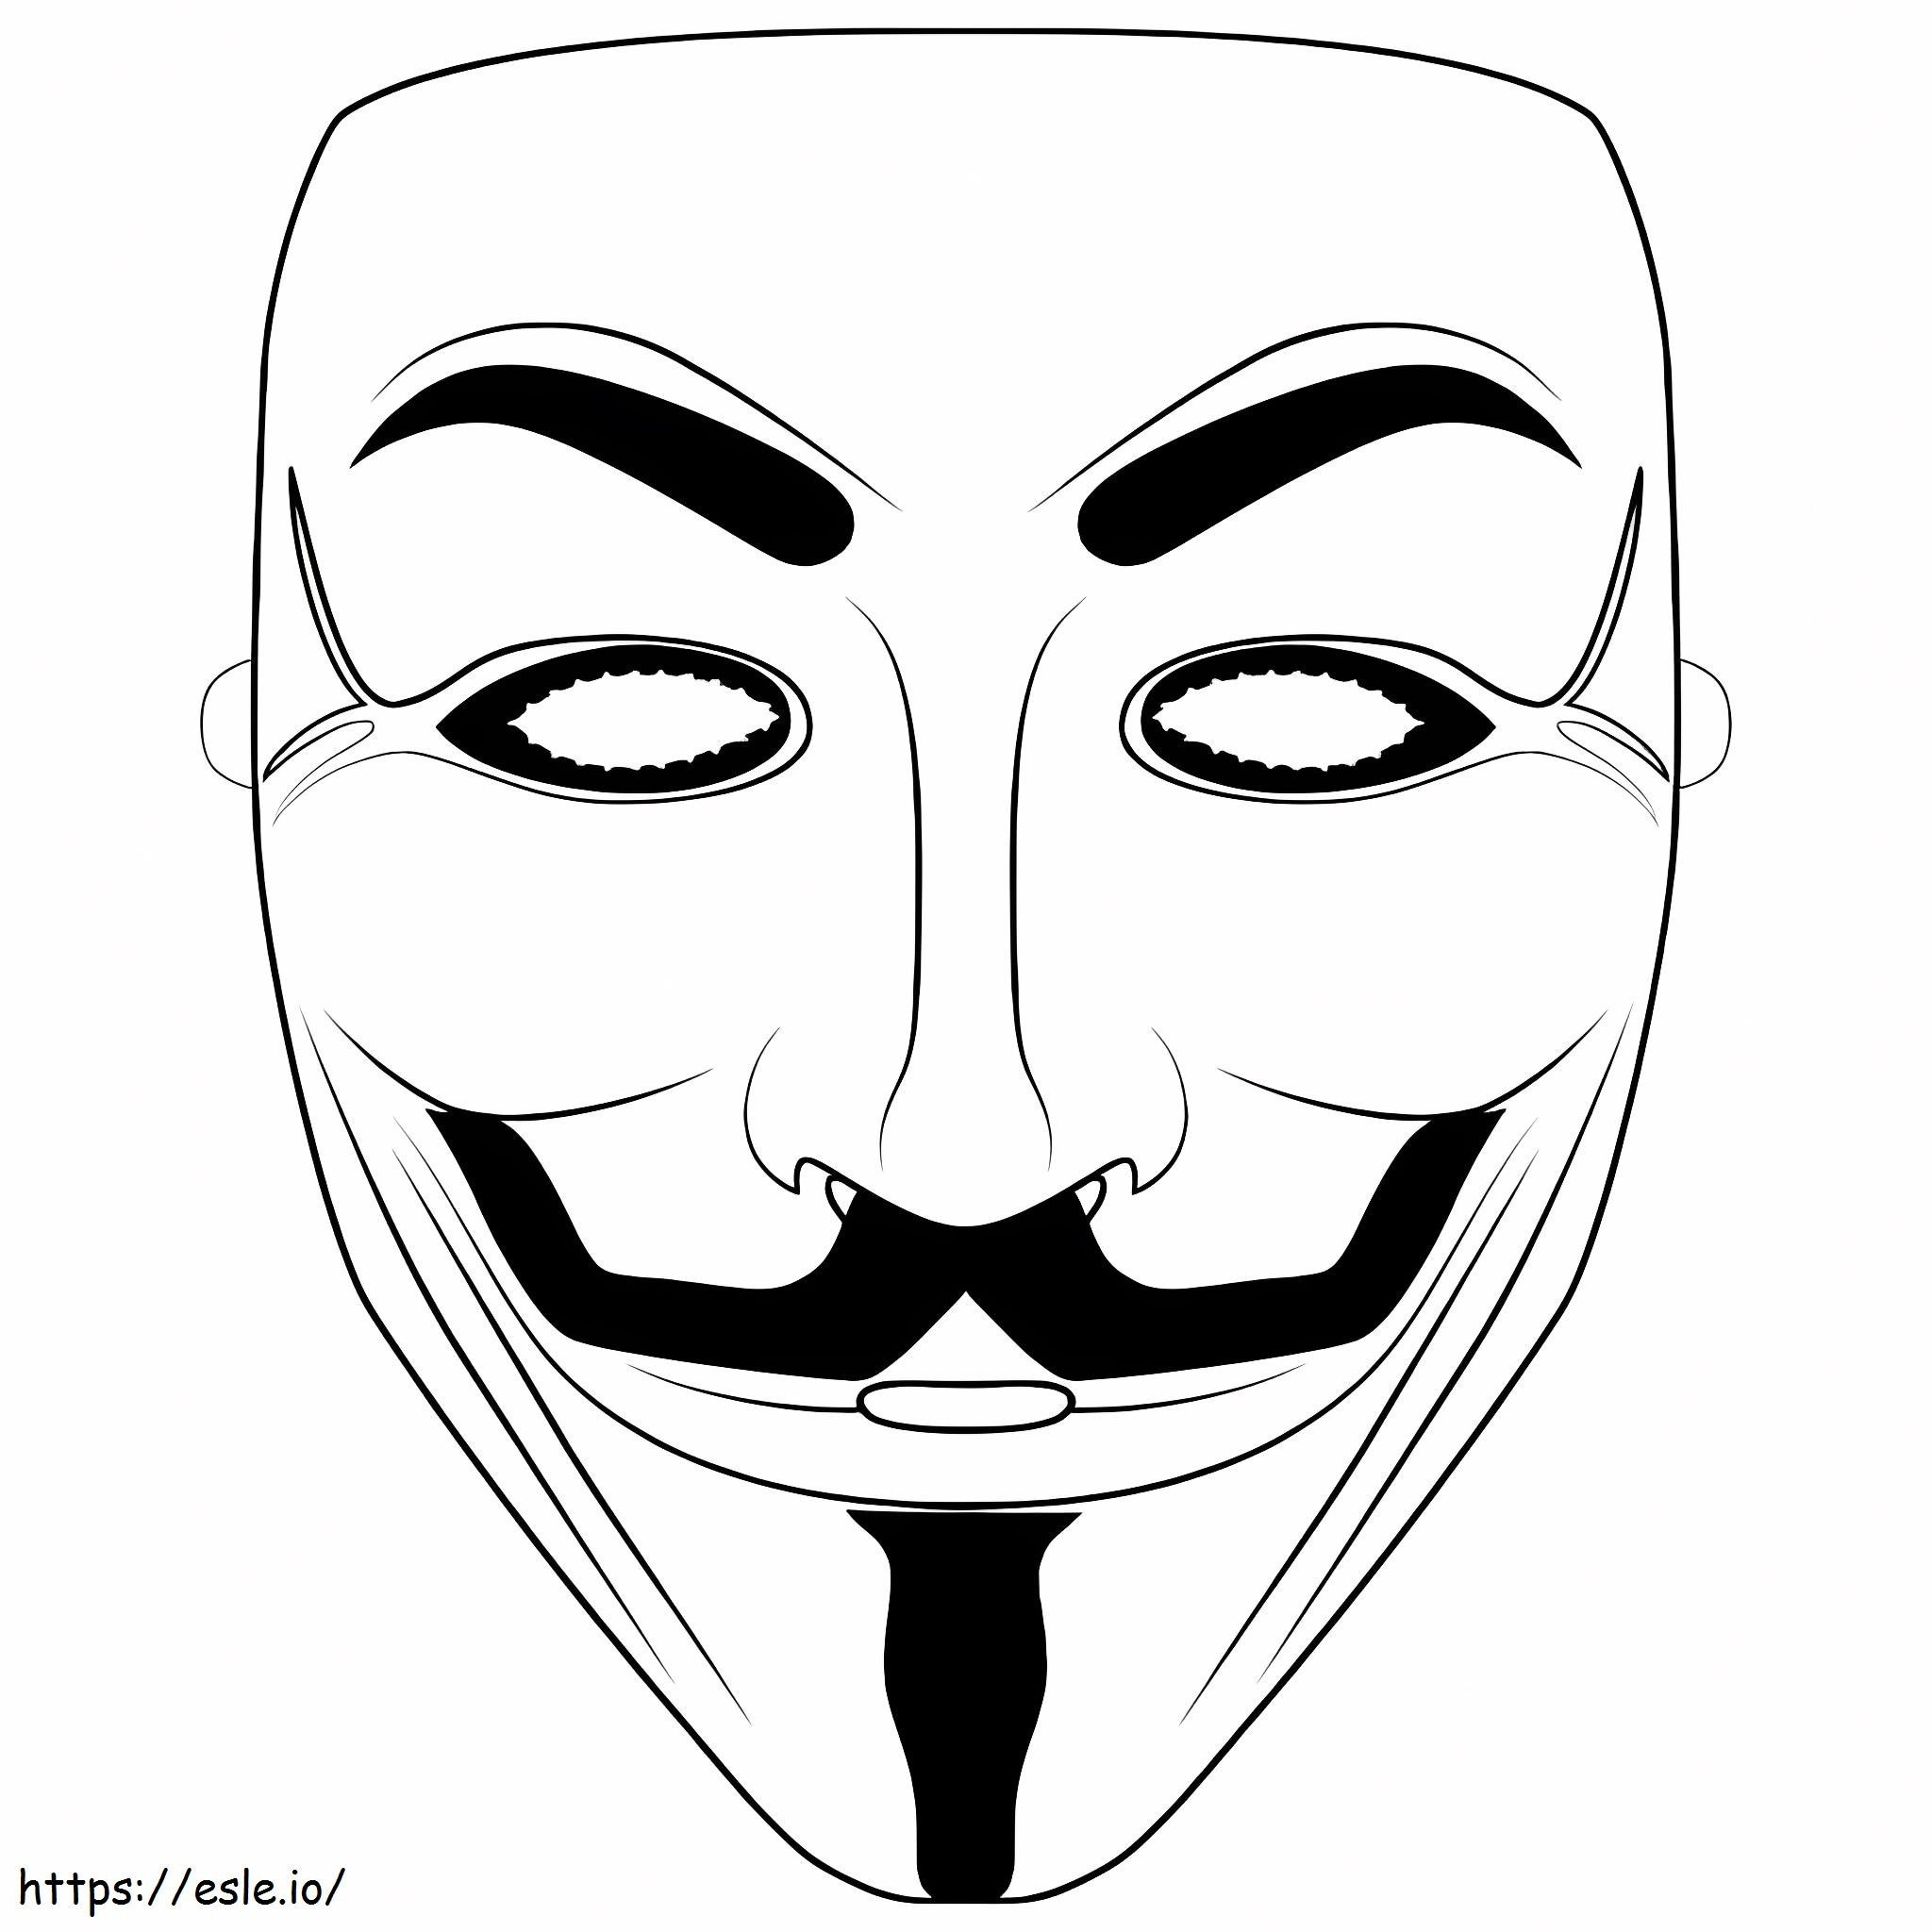 Hacker Mask coloring page